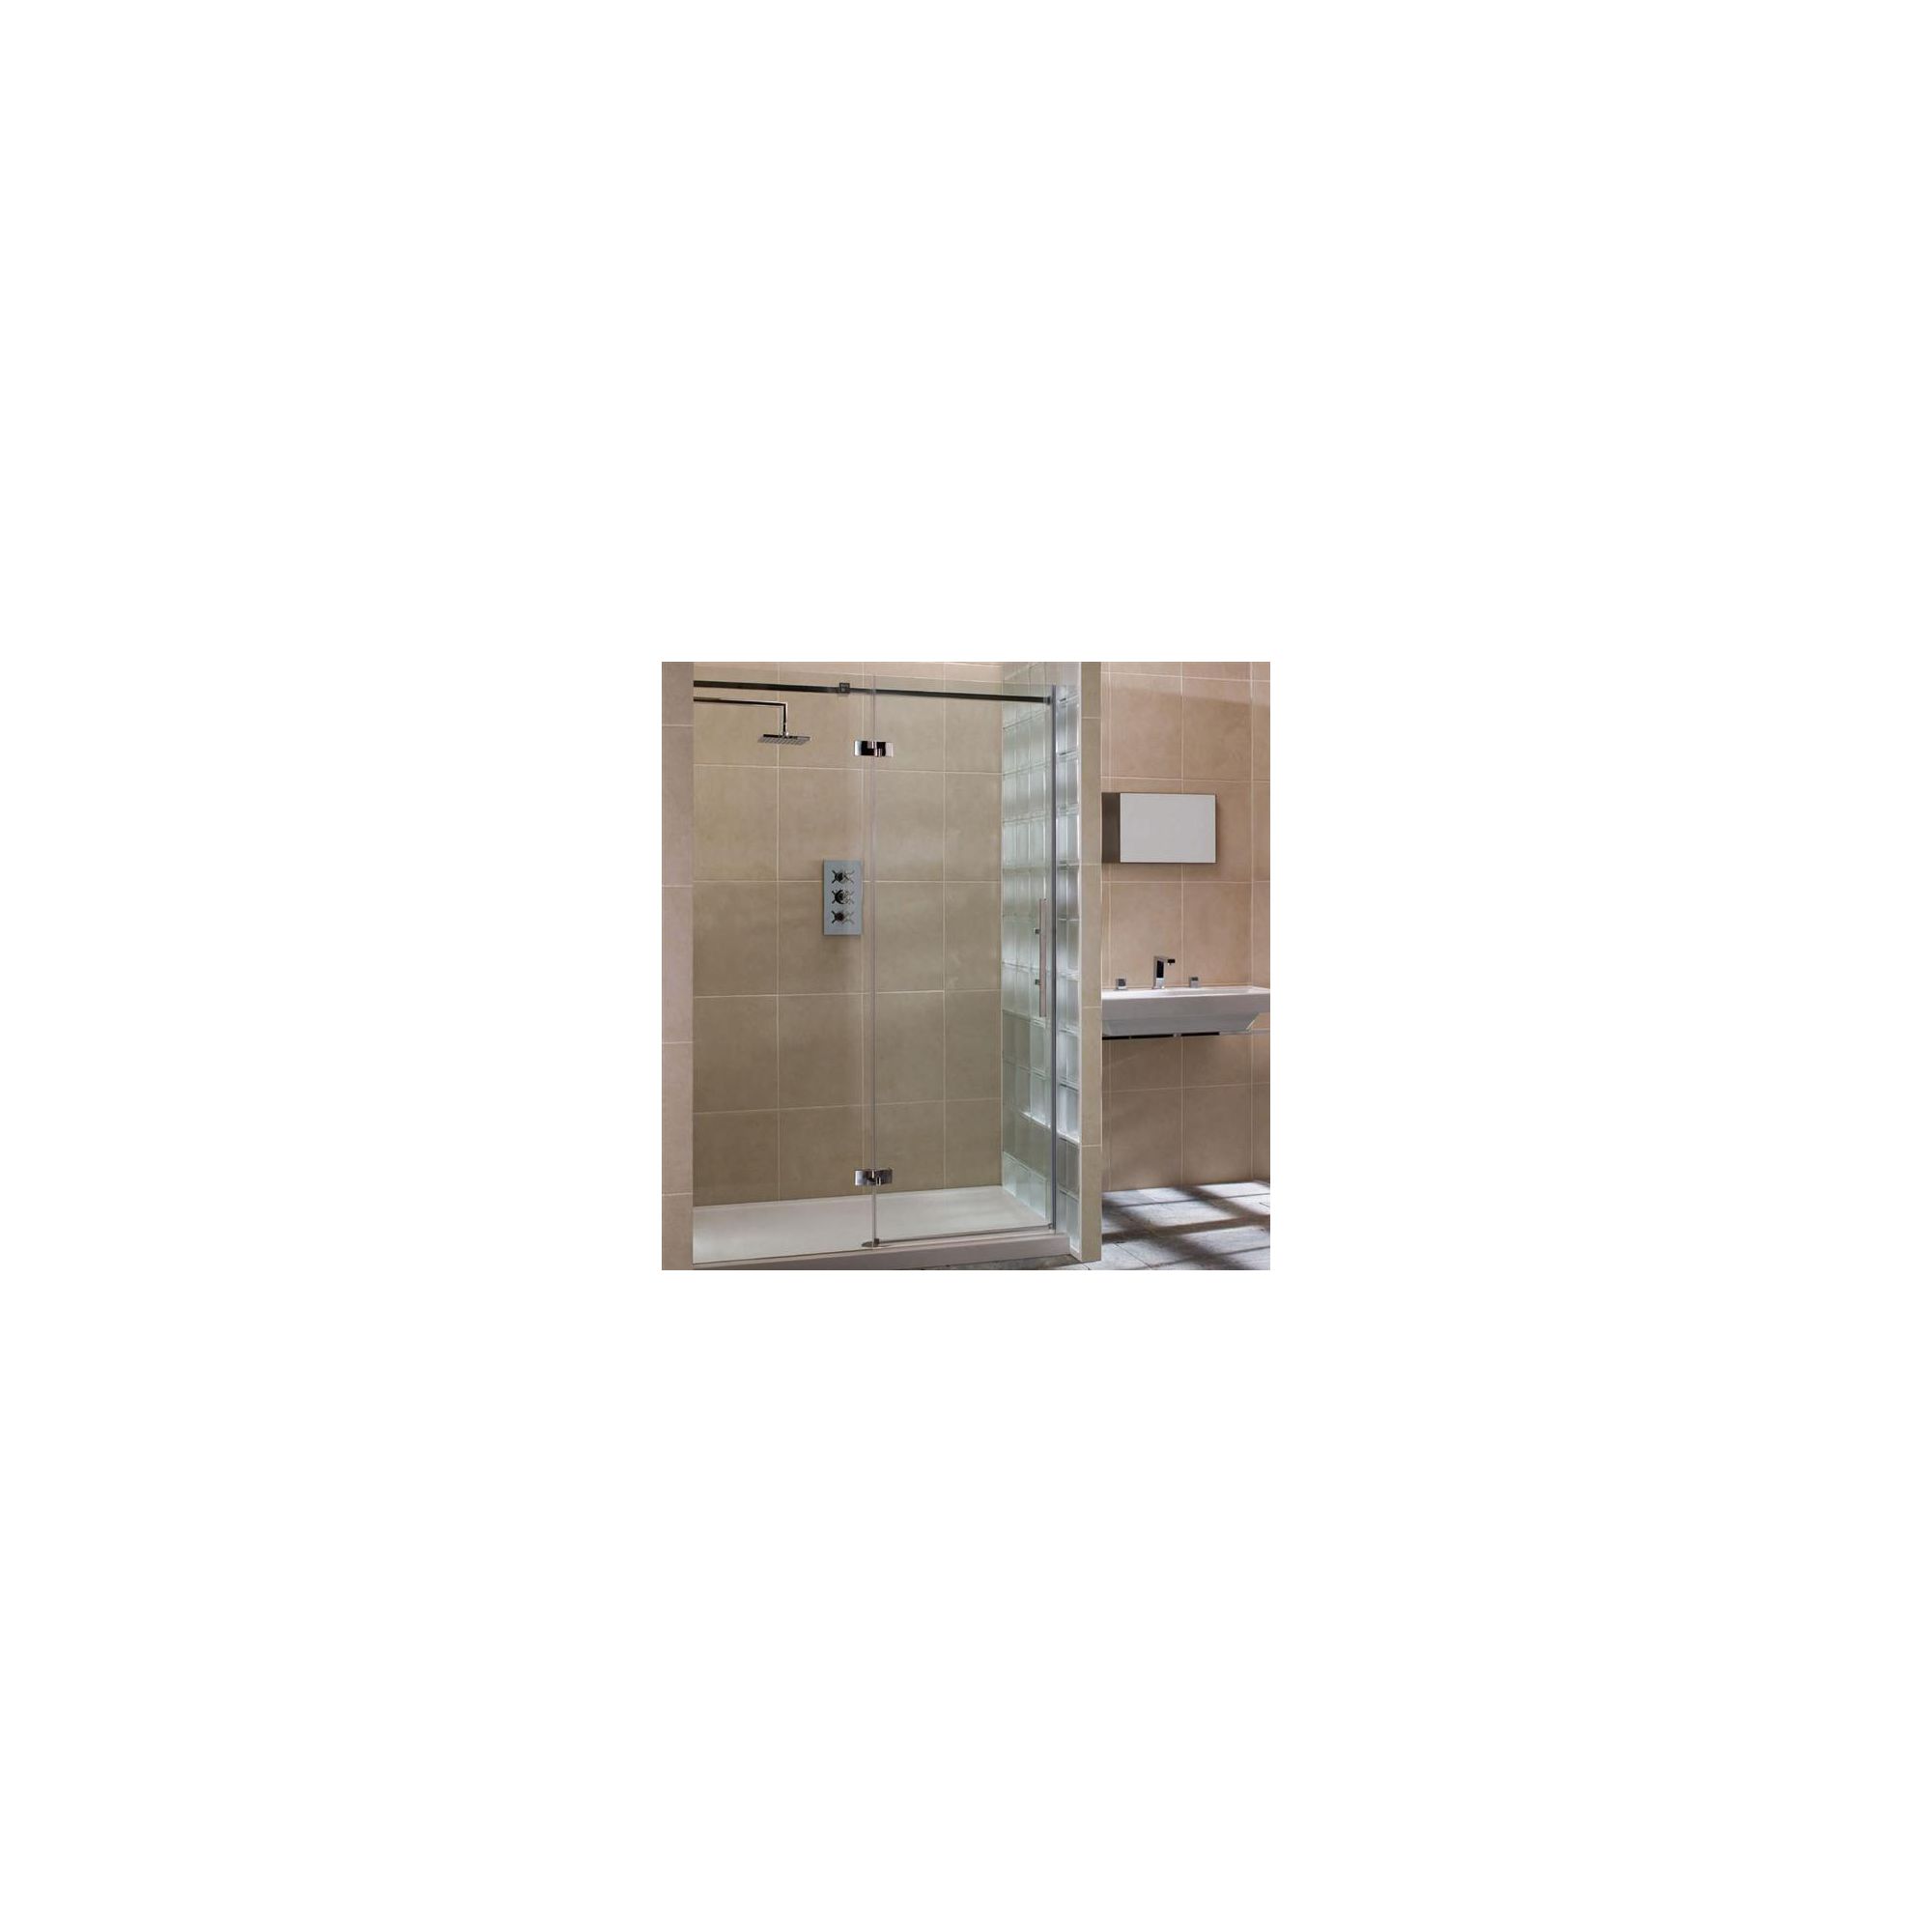 Merlyn Vivid Nine Hinged Door Alcove Shower Enclosure with Inline Panel, 1200mm x 800mm, Left Handed, Low Profile Tray, 8mm Glass at Tesco Direct